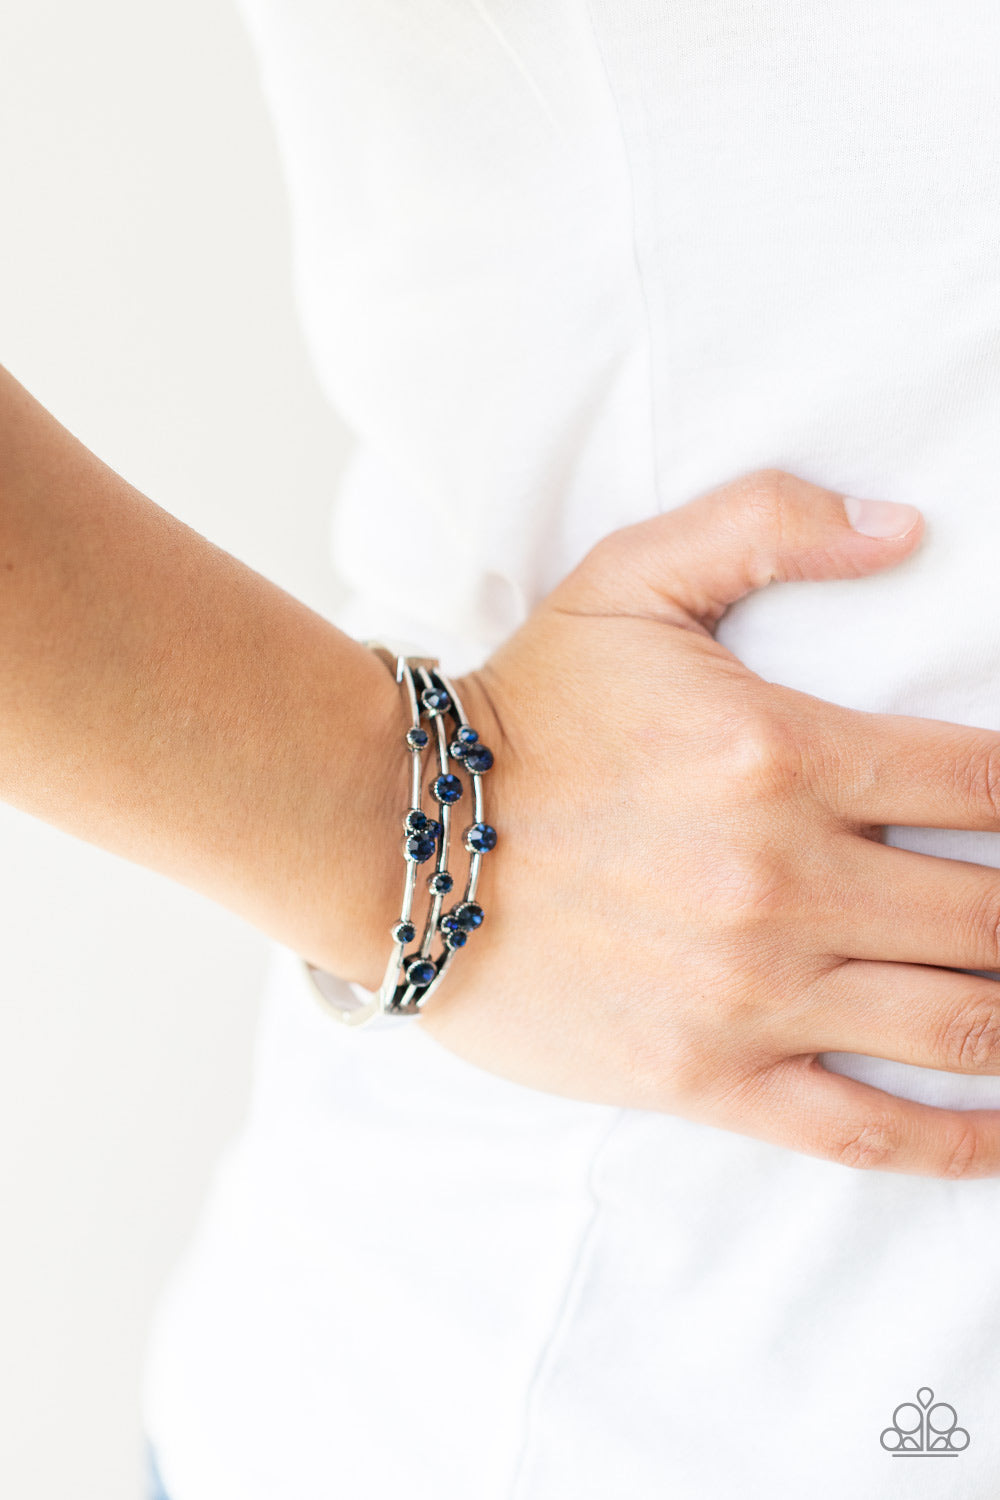 A smattering of glittery blue rhinestones adorn three silver bars that coalesce into a versatile silver cuff-like bangle around the wrist. Features a hinged closure.  Sold as one individual bracelet.